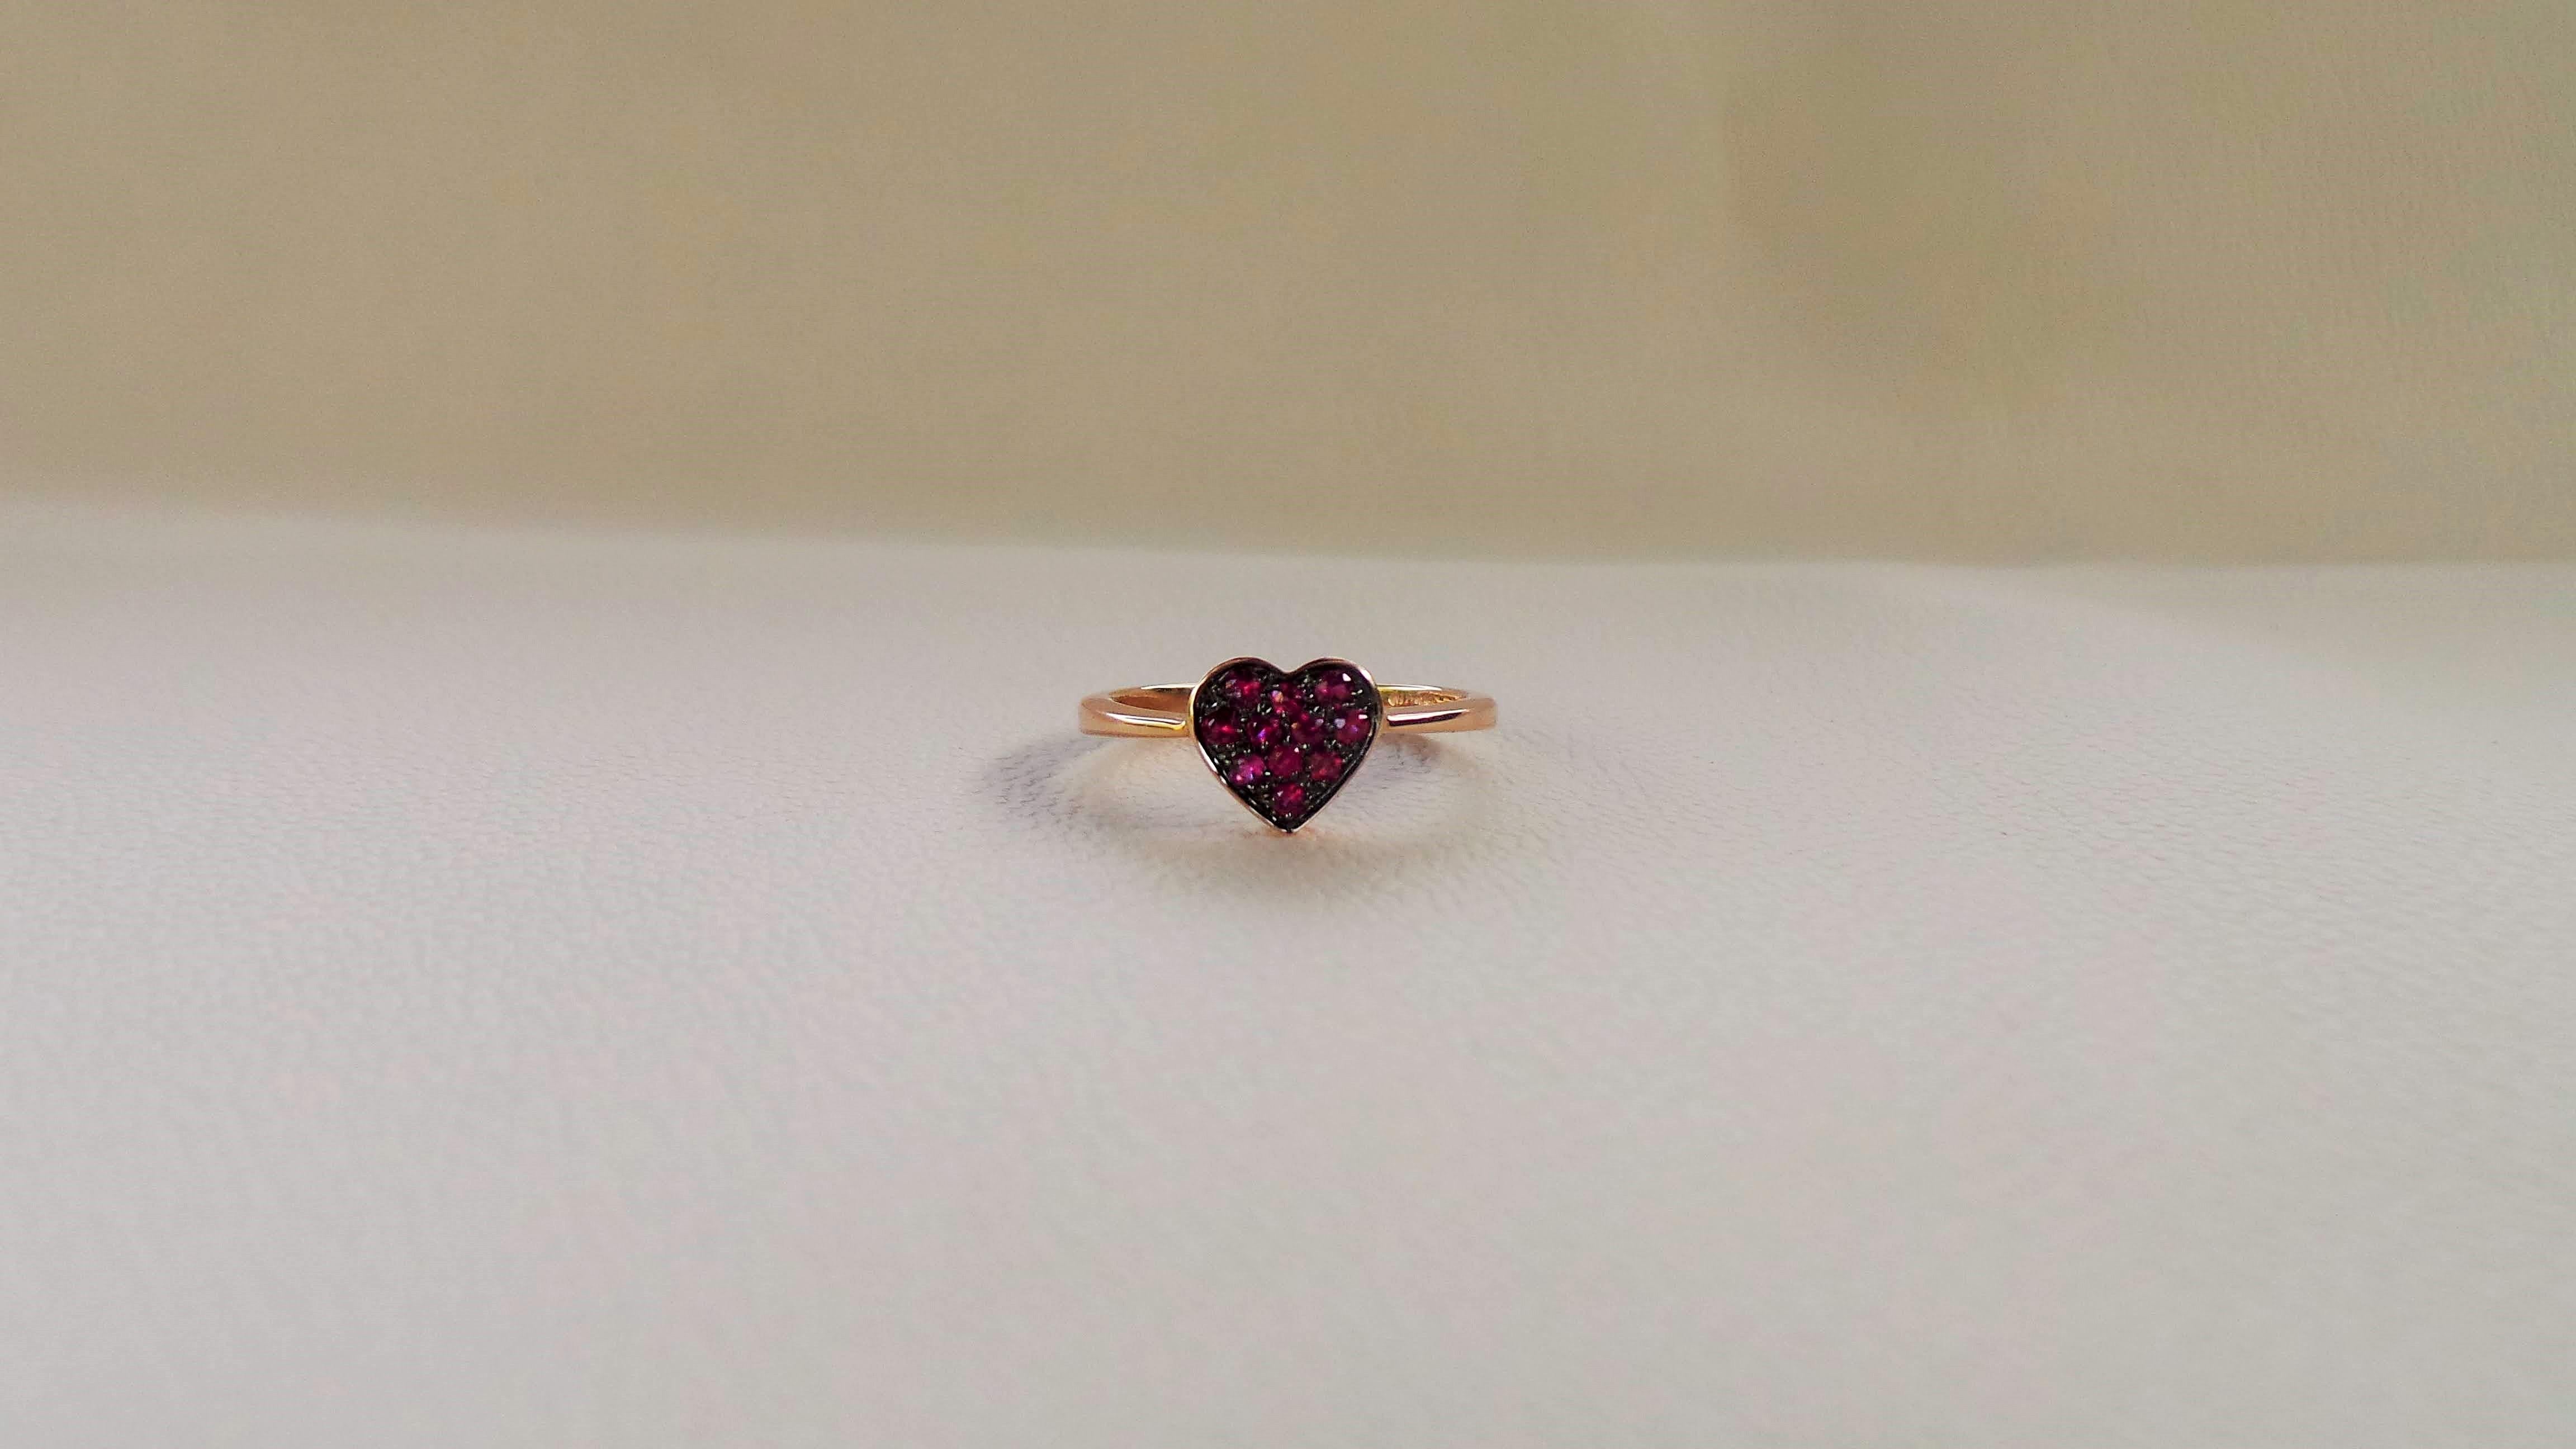 Andrea Macinai design a dedicated collection for engament rings  with red ruby at heart.  
Crafted with clean, contemporary lines, this timeless ring is designed with an pave of ruby in the heart. Modern with a romantic sensibility, this ring